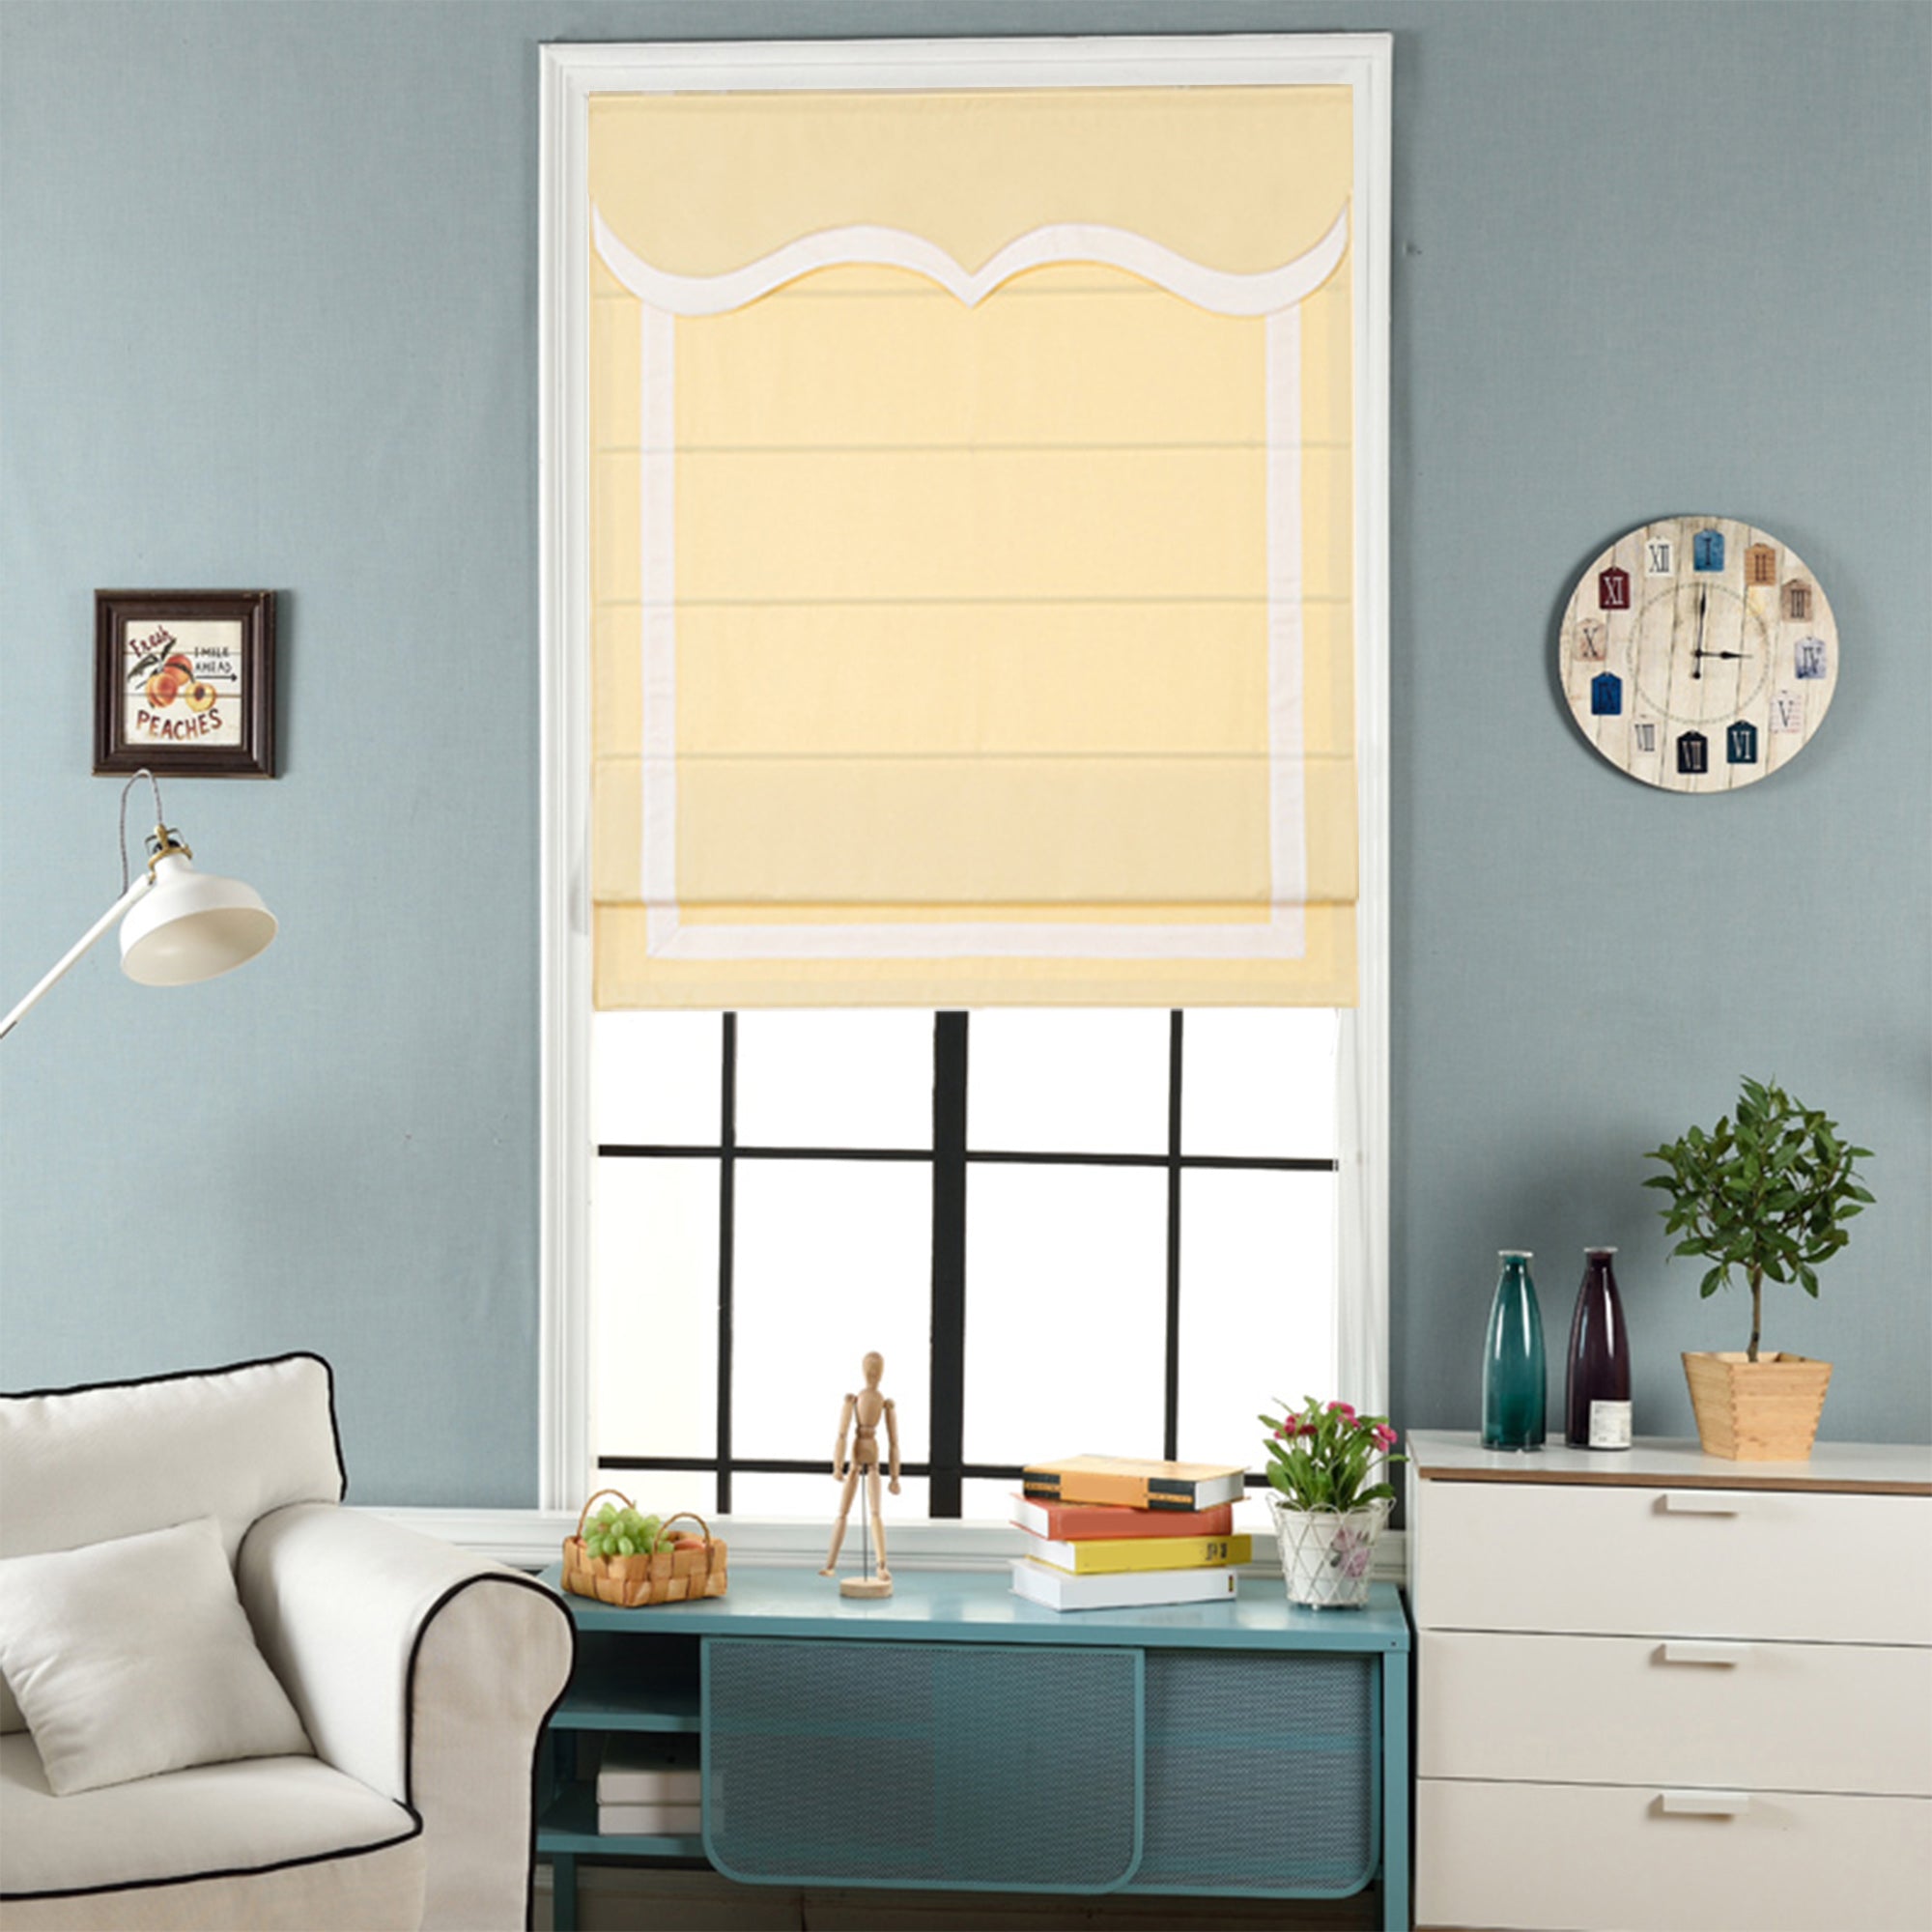 Quick Fix Washable Roman Window Shades Flat Fold with Valance, SG-012 Yellow with White trim